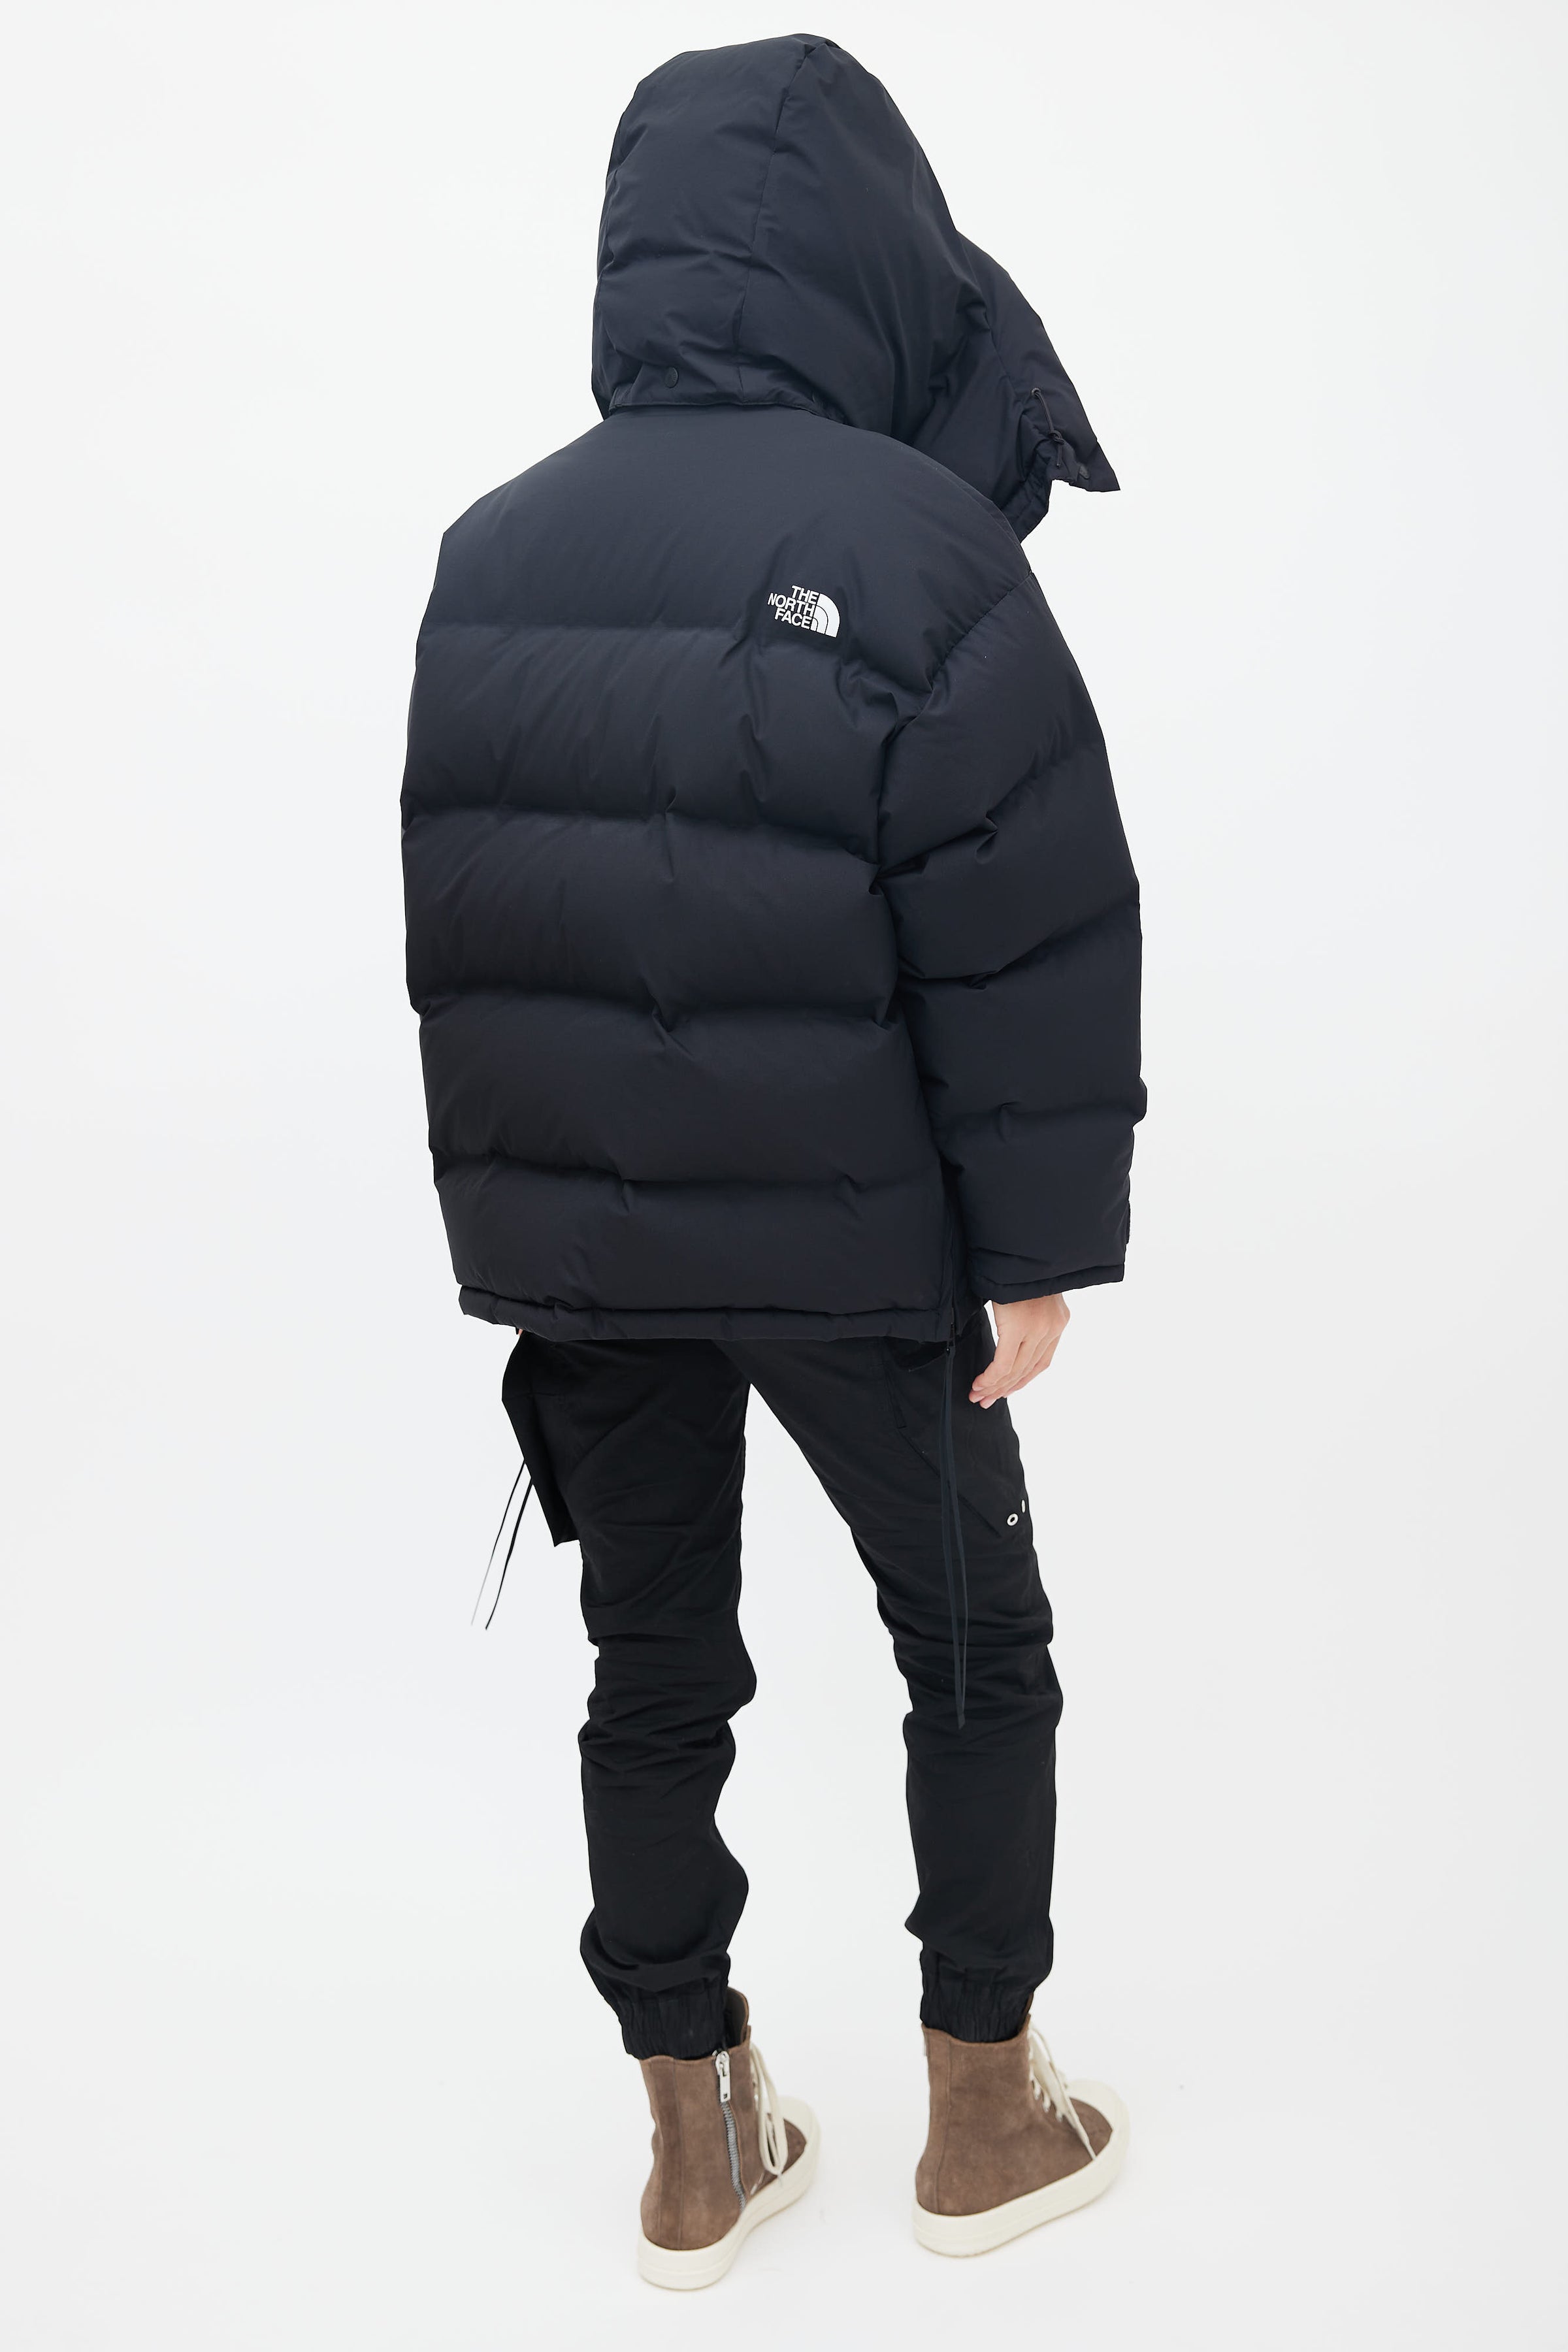 The North Face // x HYKE FW 2019 Black Hooded Puffer Jacket – VSP